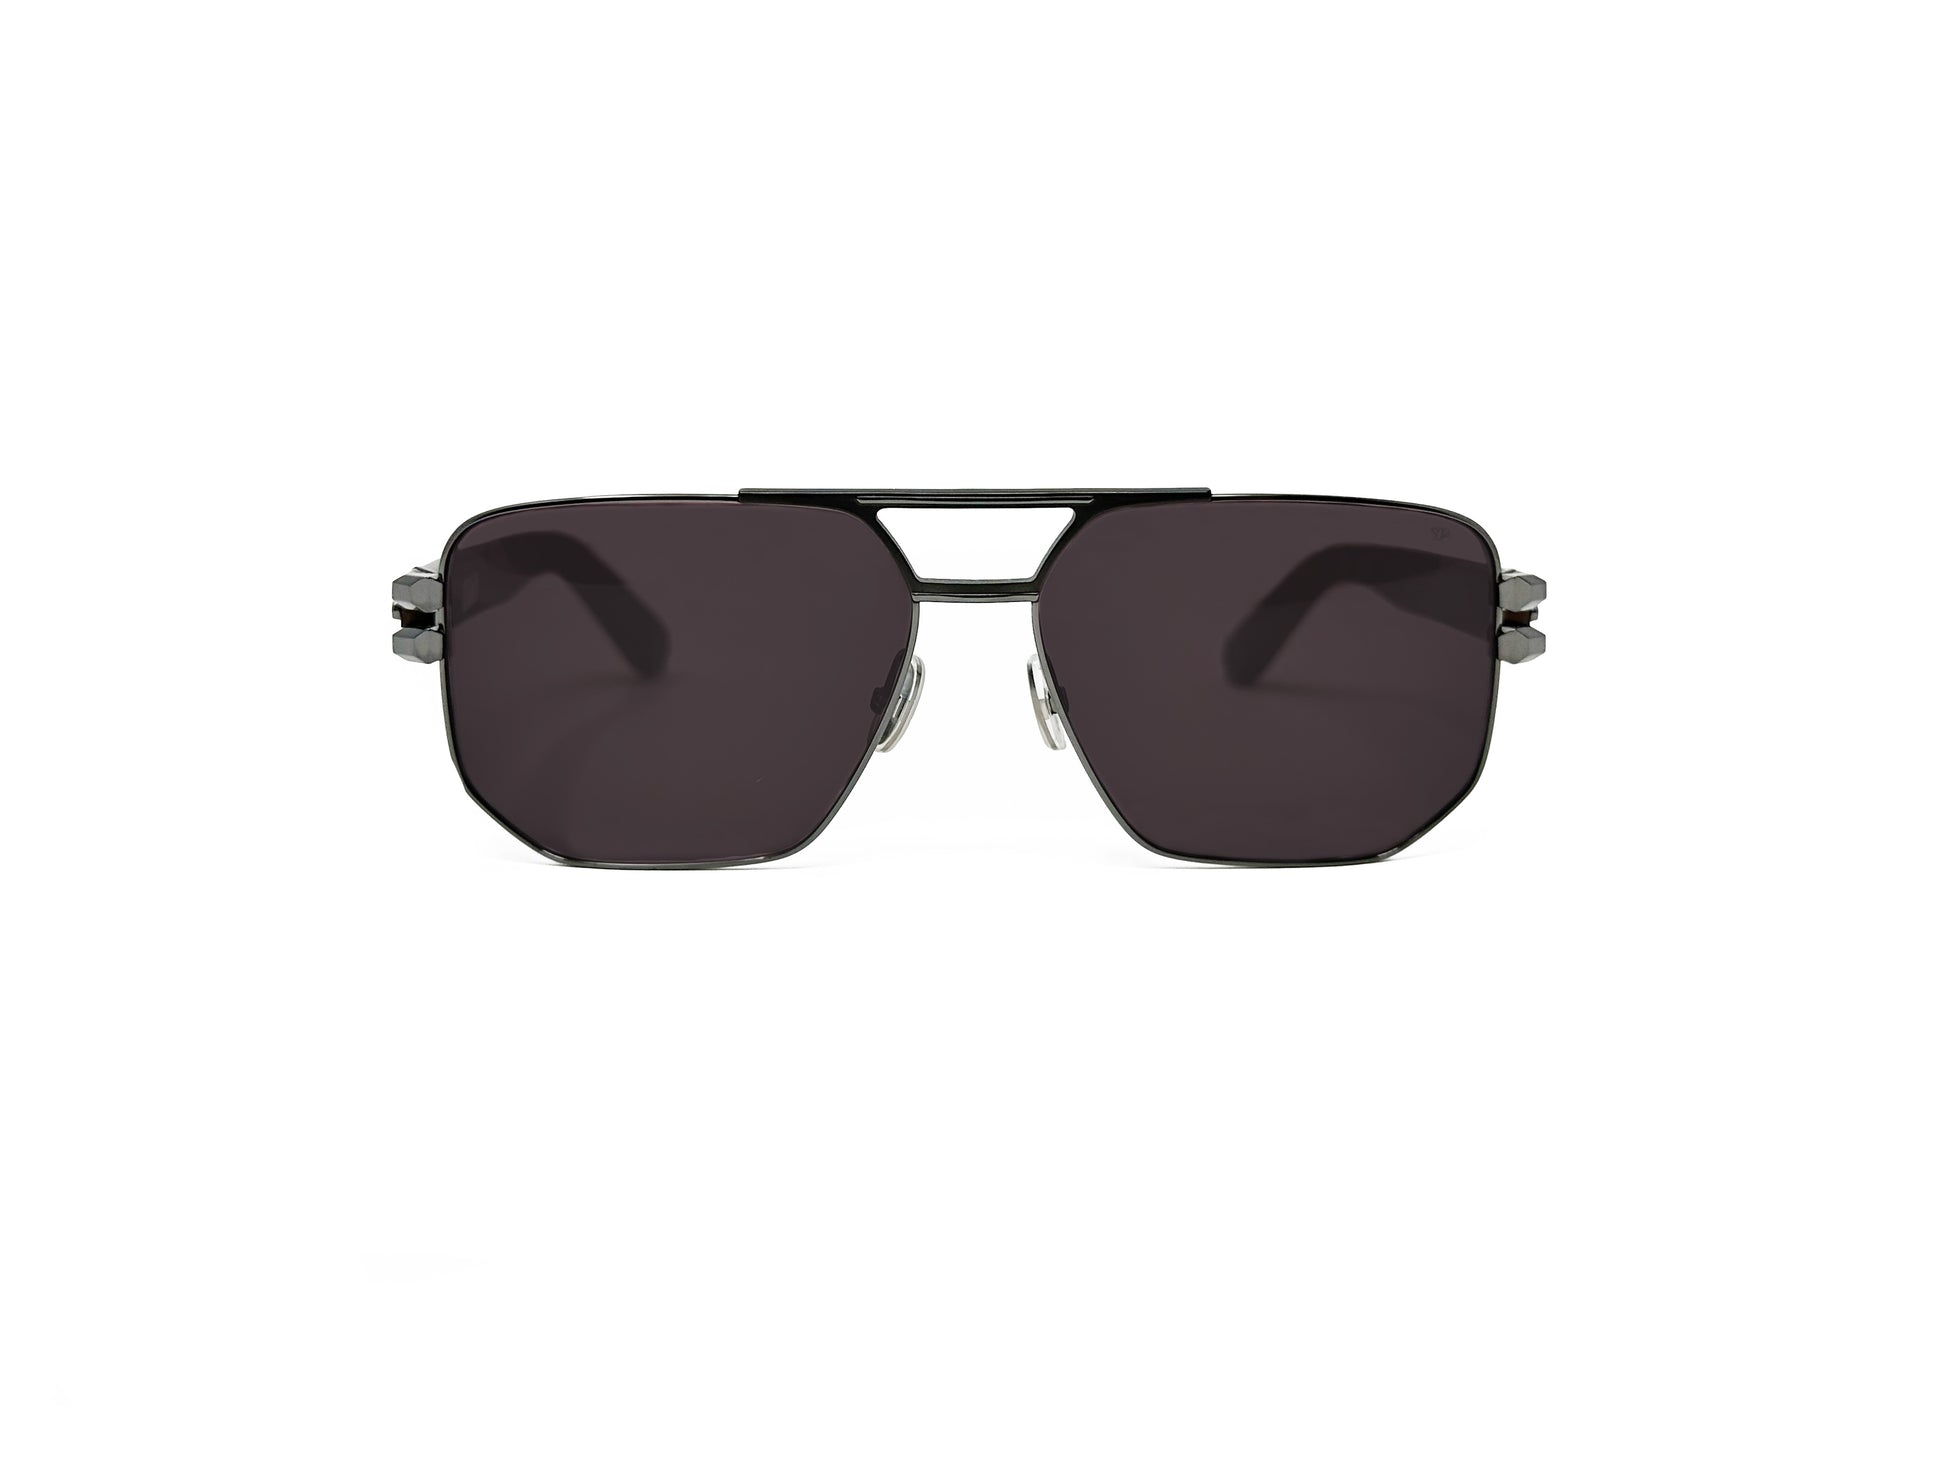 Philipp Plein squared aviator sunglass. Model: SP012 Contemporary. Color: 0584 gunmetal with tortoise temples. Front view. 